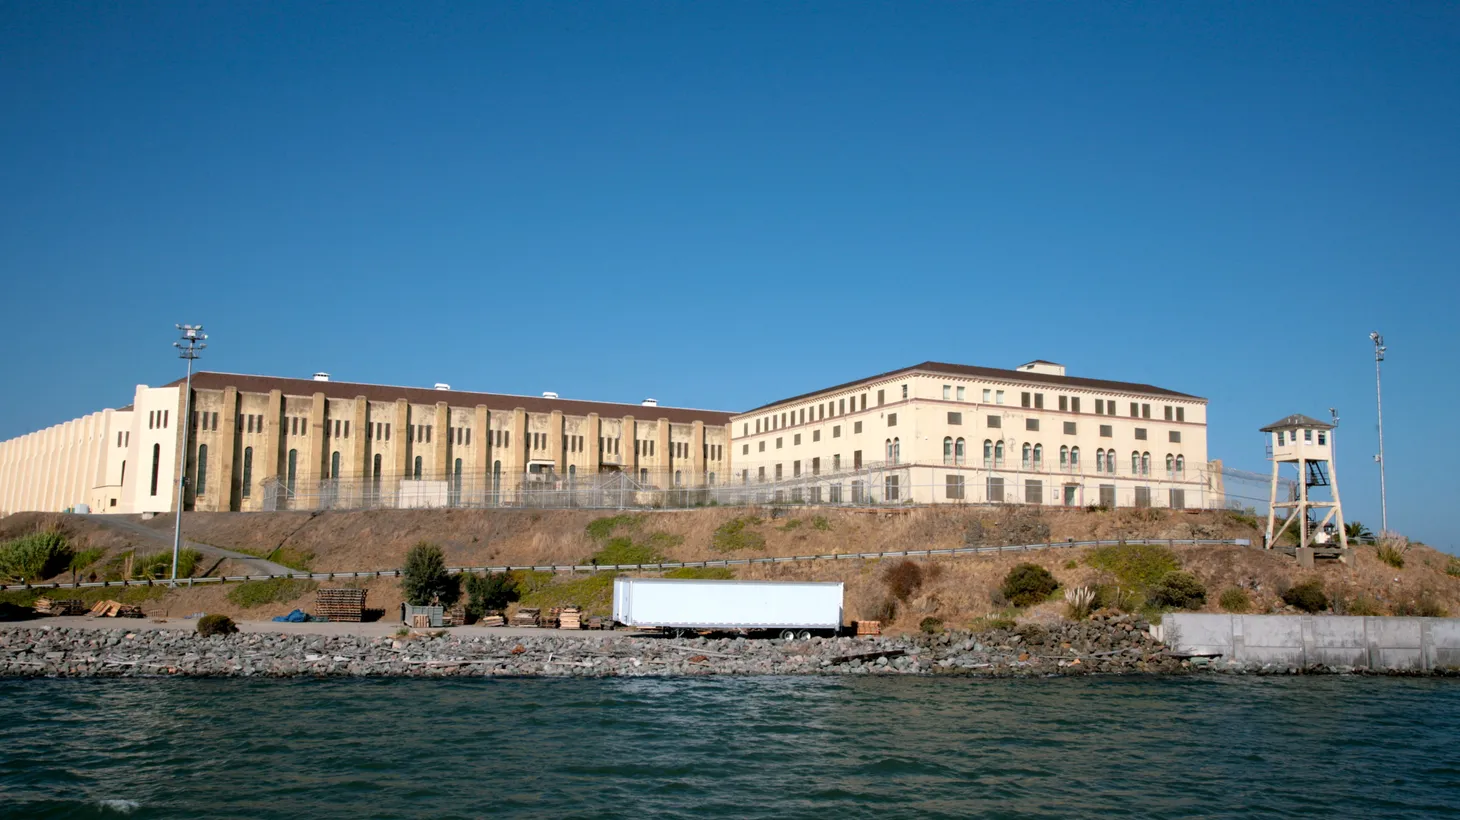 San Quentin Penitentiary in Northern California, home to thousands of incarcerated people, has been the subject of multiple investigations for abuse, neglect, and overcrowding.